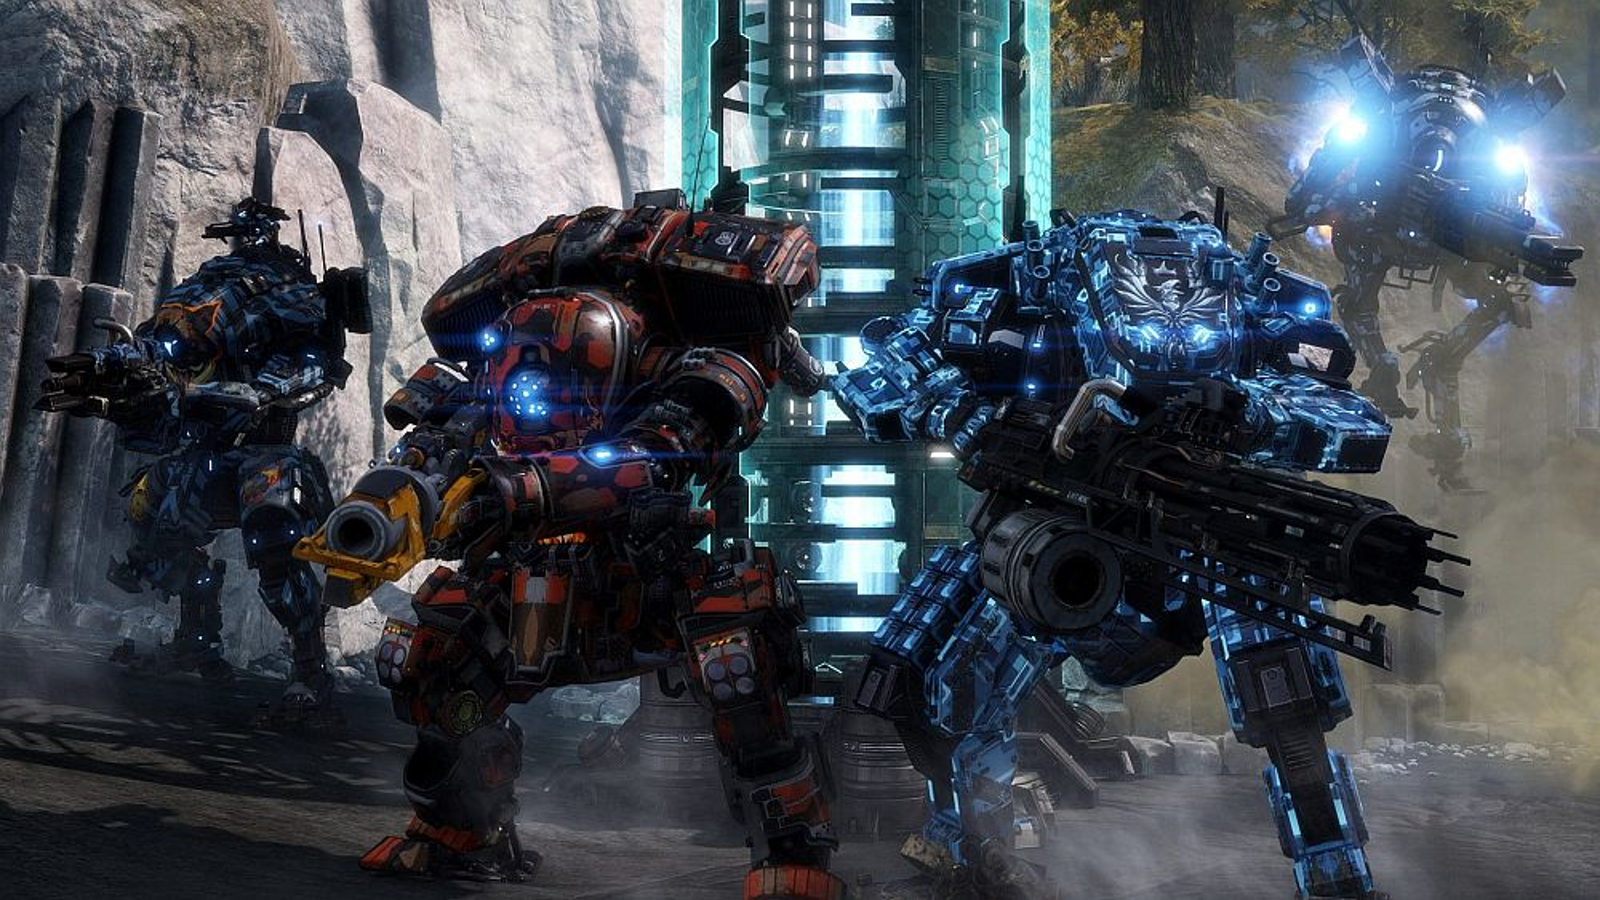 Titanfall 2 update drops a new titan, more maps, and a bunch of in-game  improvements